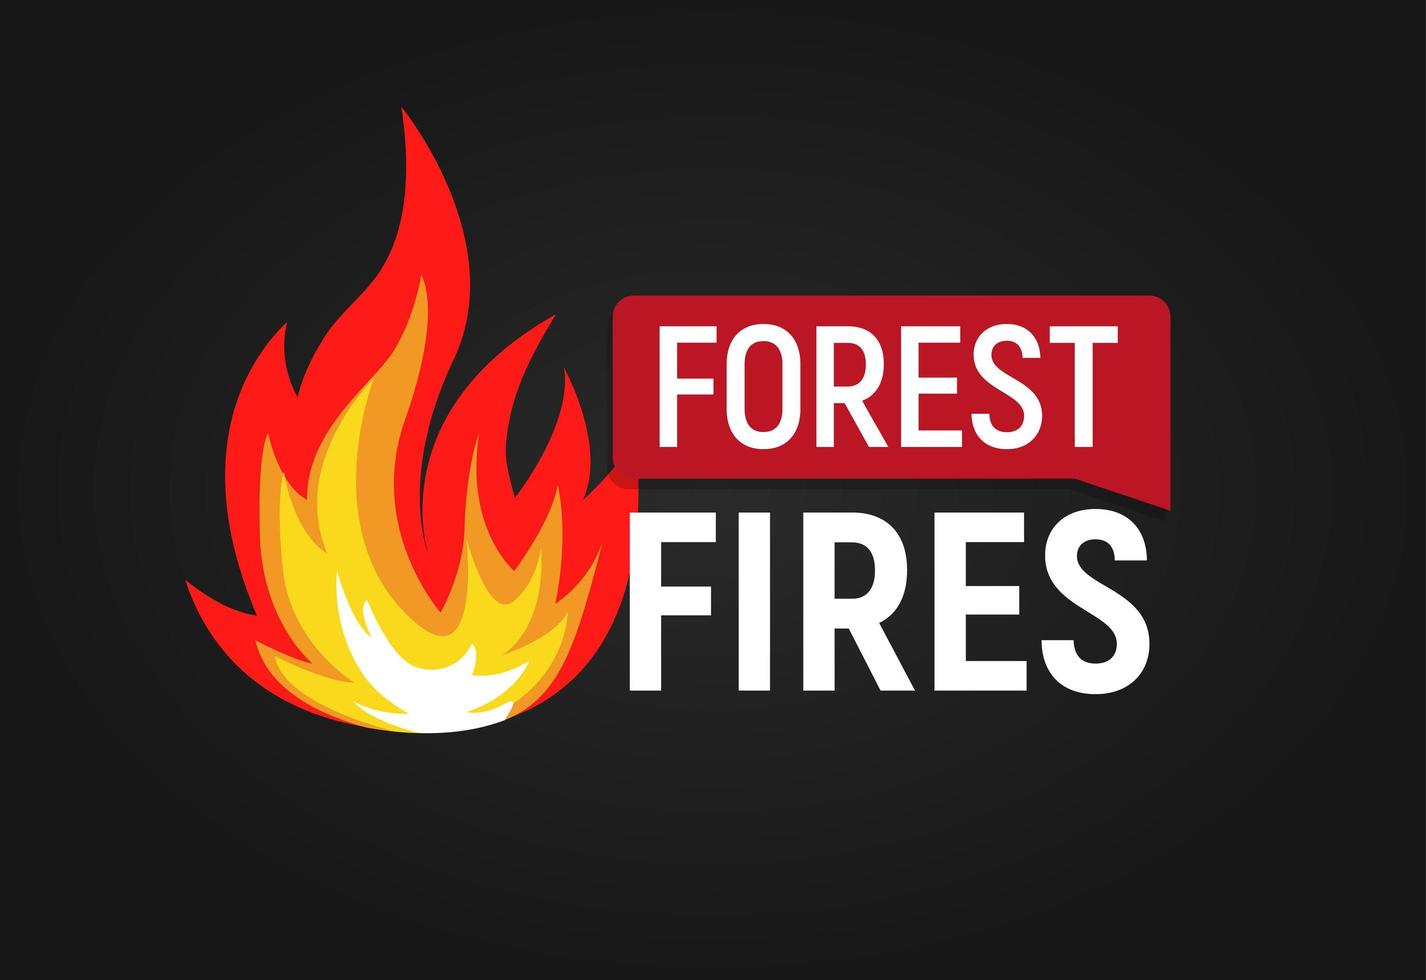 Forest fires. Big flame with text flat logo template. Isolated vector illustration on white background.